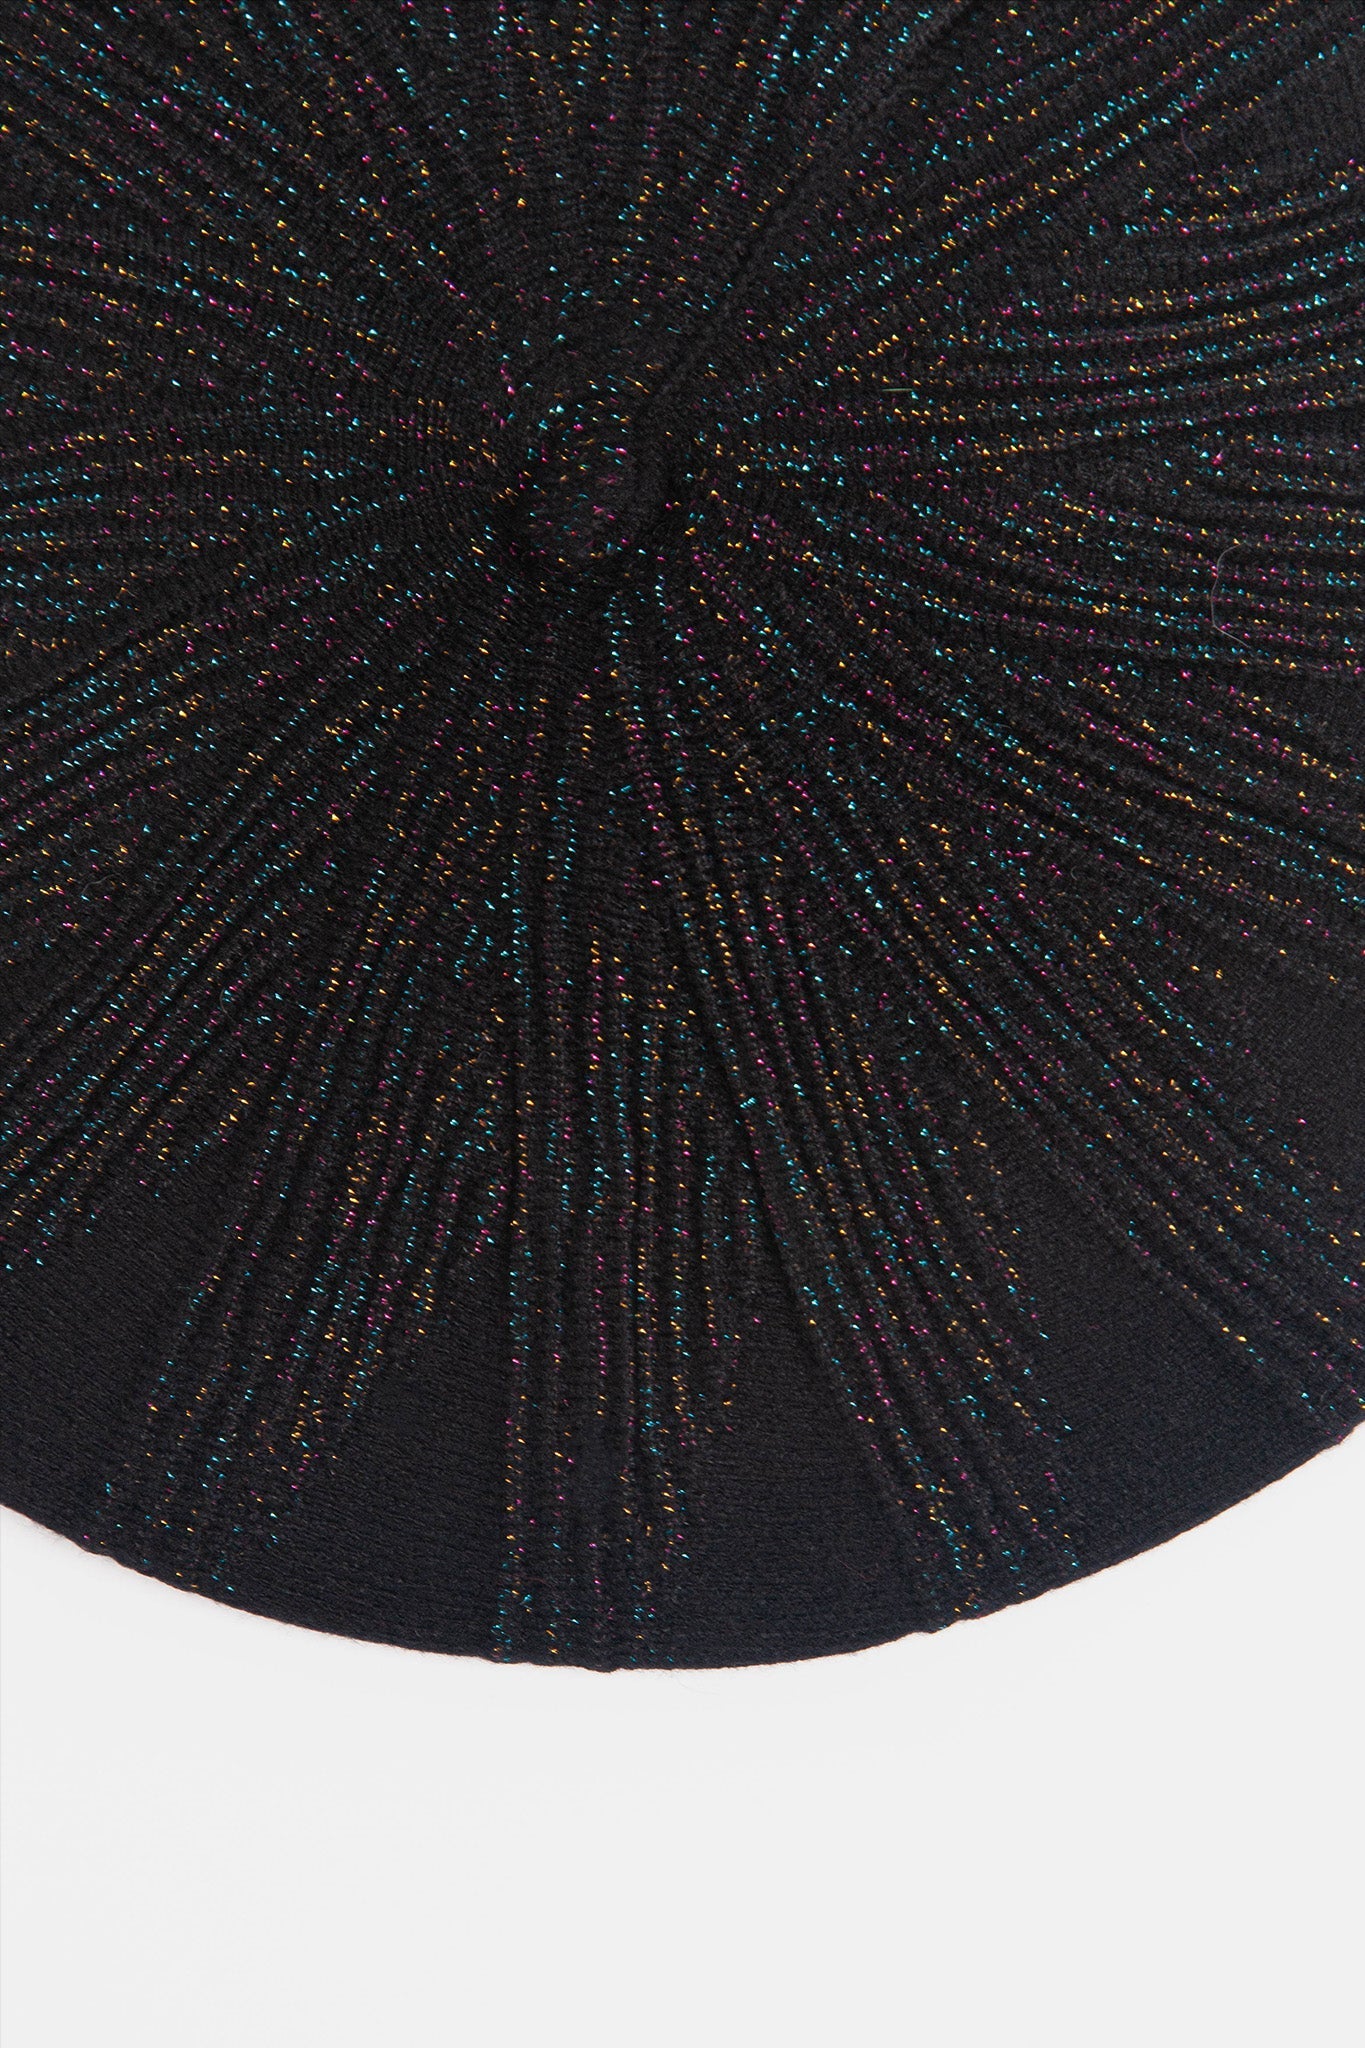 close up of the mutlicoloured rainbow glitter effect on the black beret